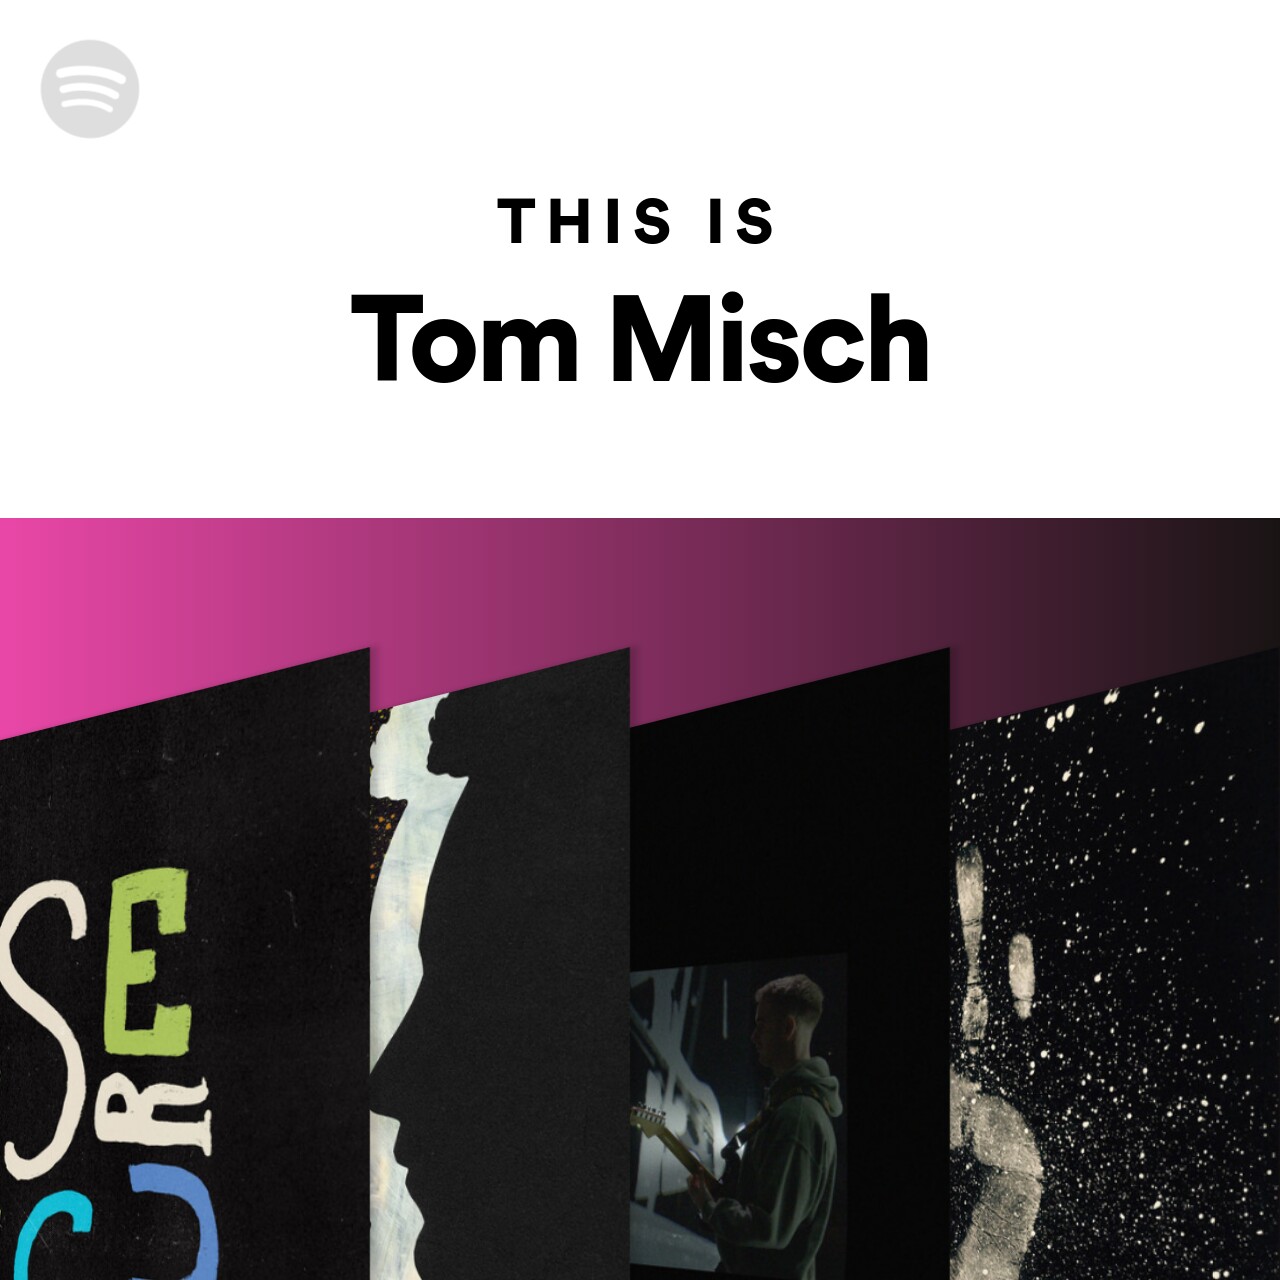 This Is Tom Mischのサムネイル